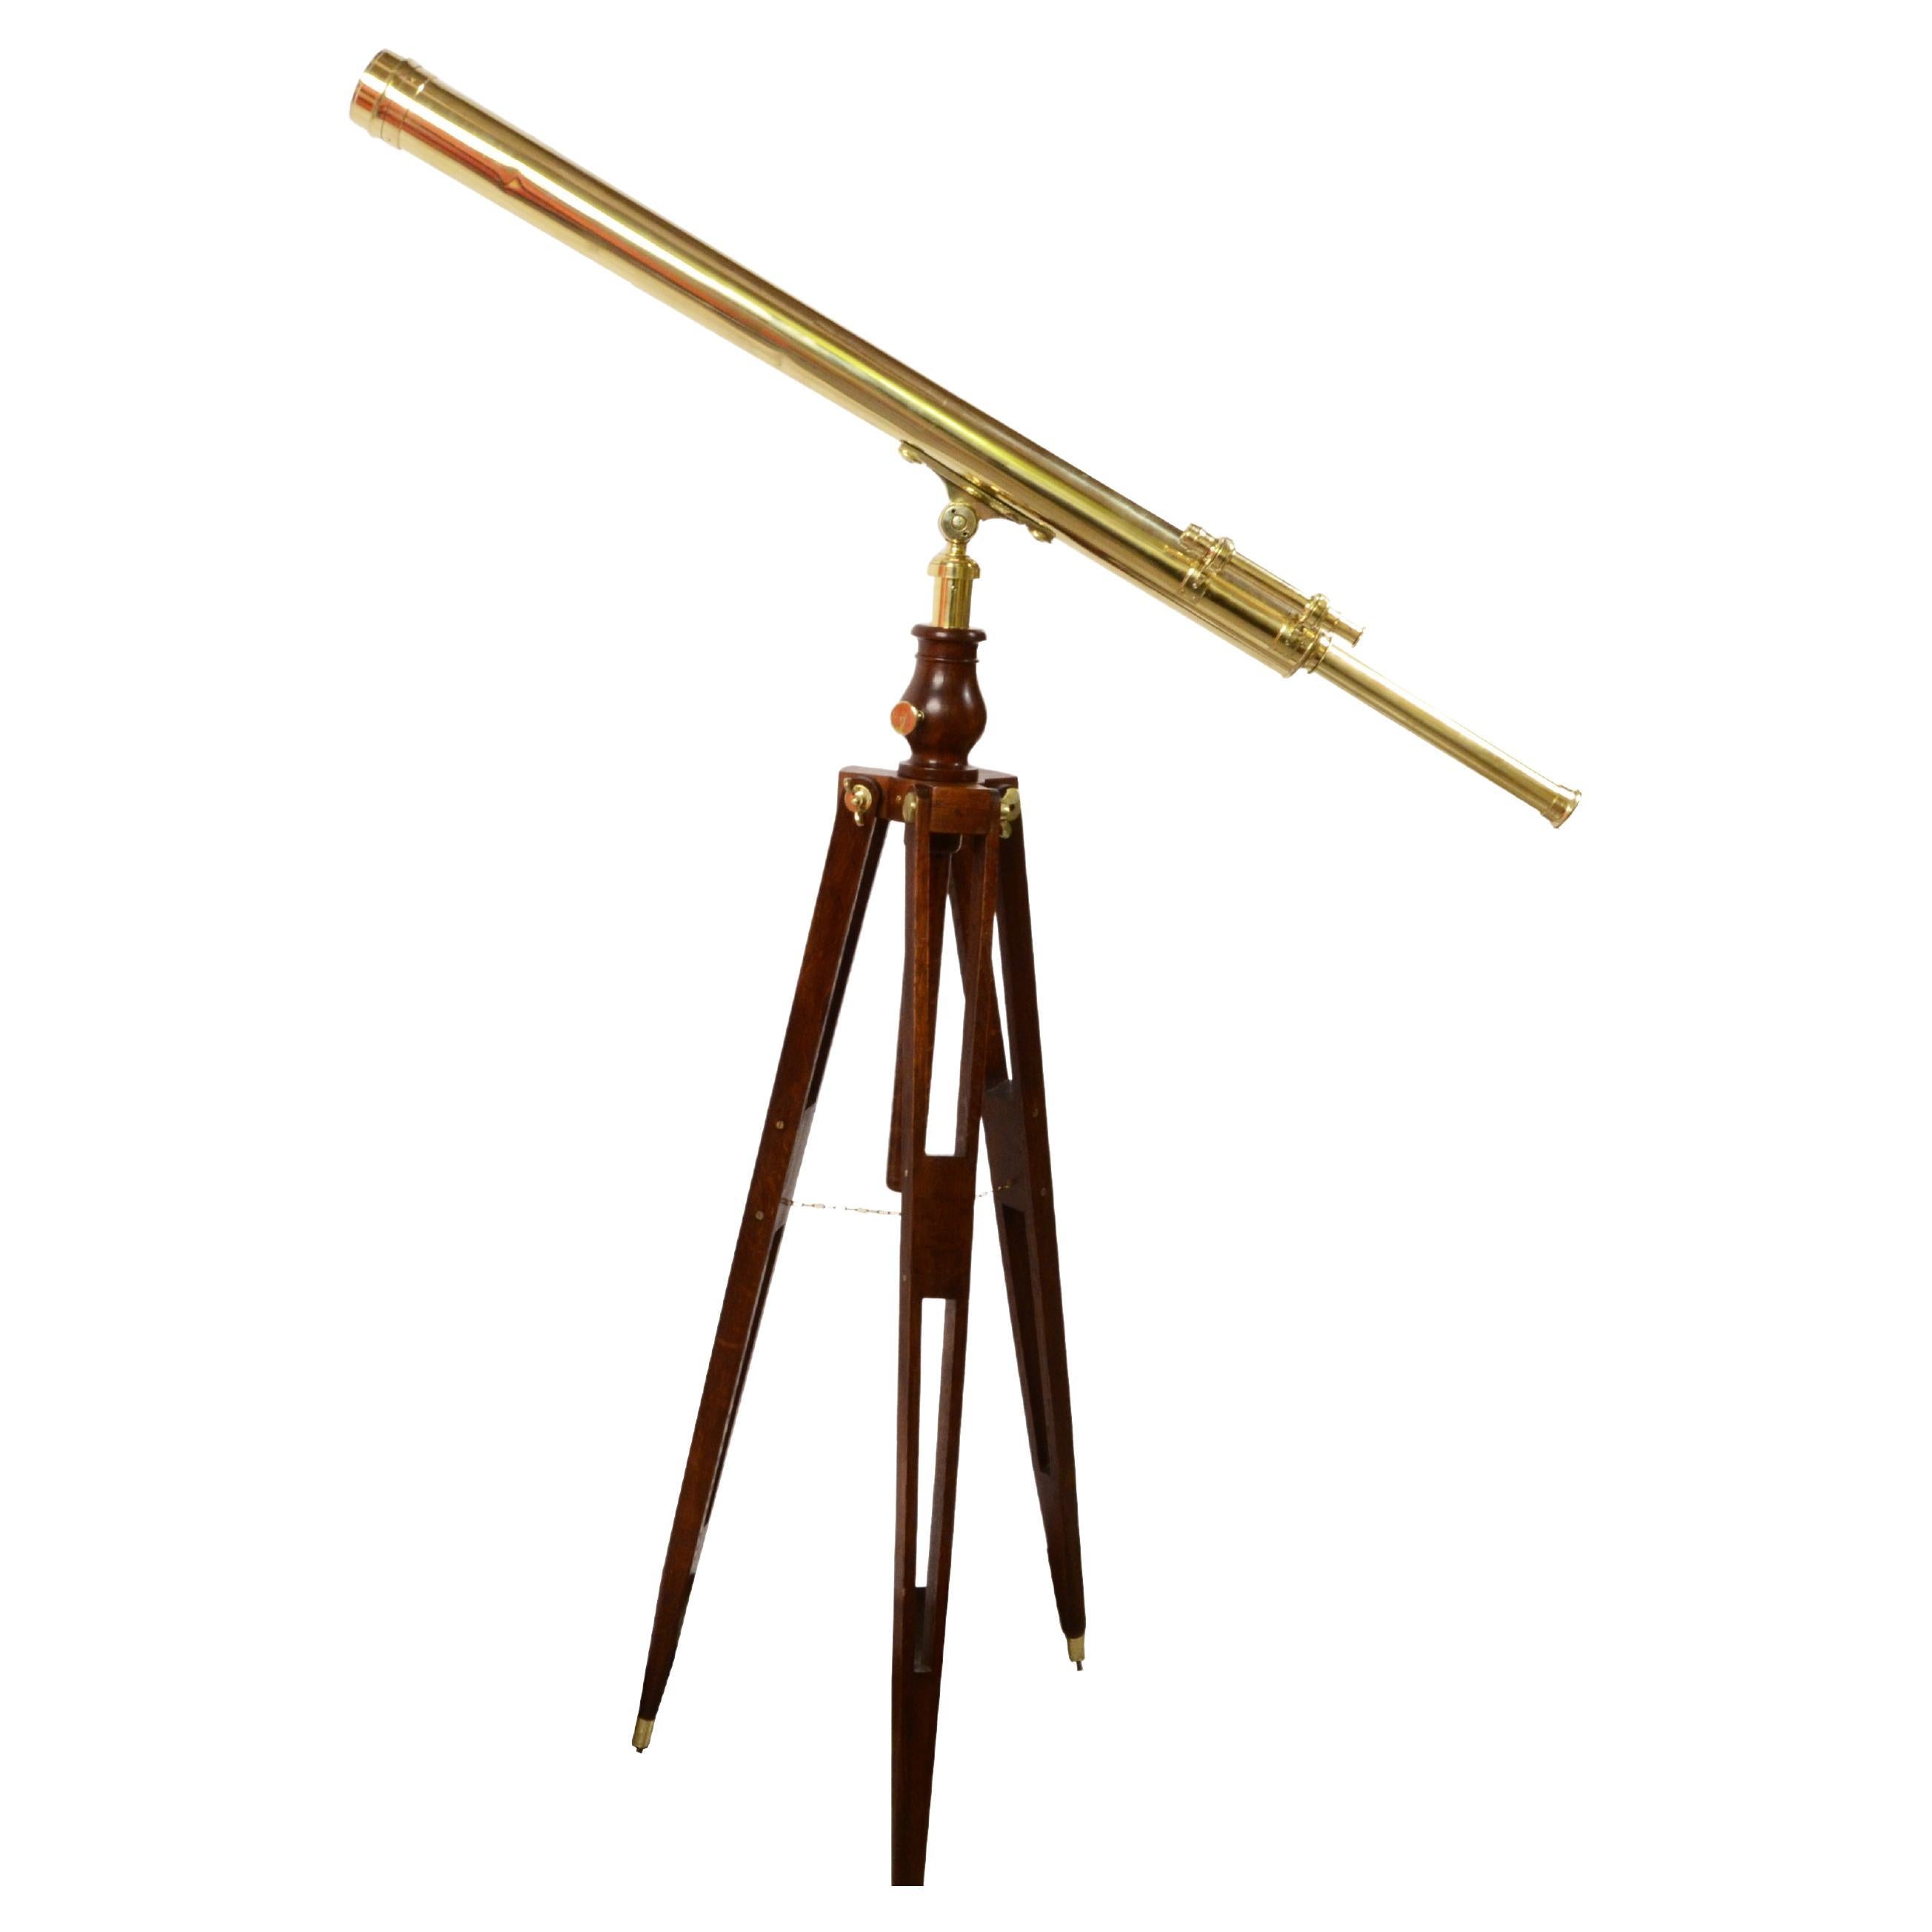 19th Century French Brass Astronomical Telescope Signed Gregoire Opticien Lyon